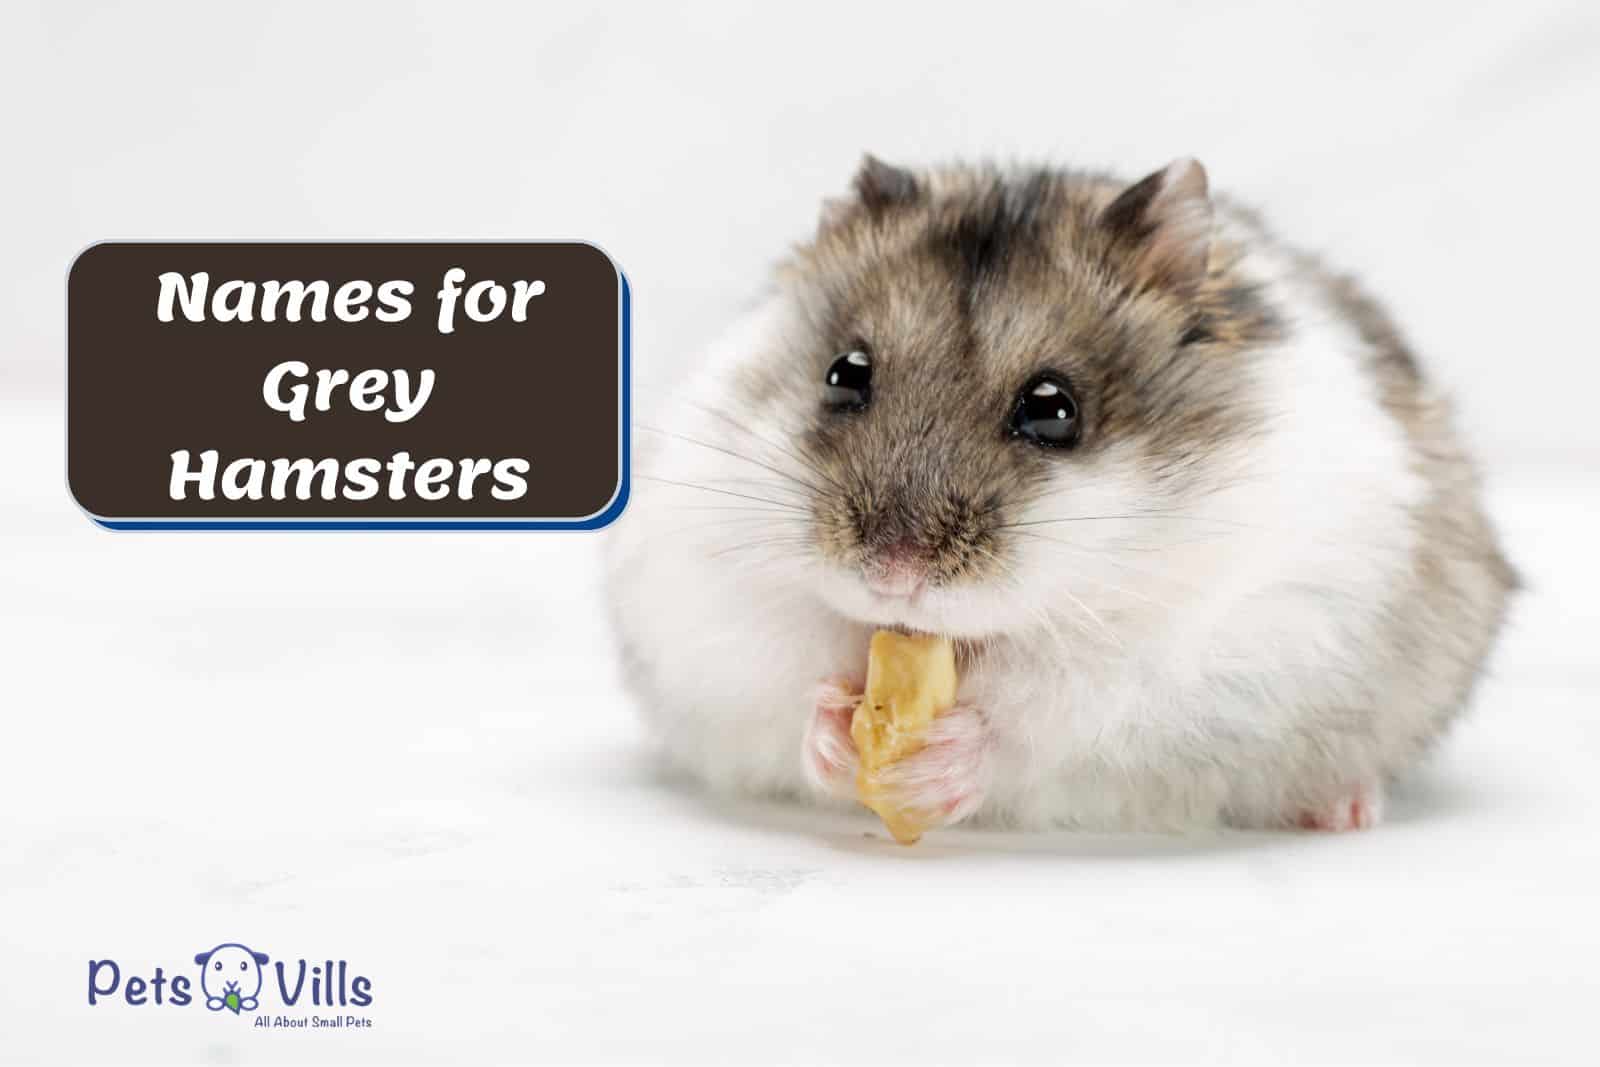 cute grey hamster eating a nut beside names for grey hamsters. text